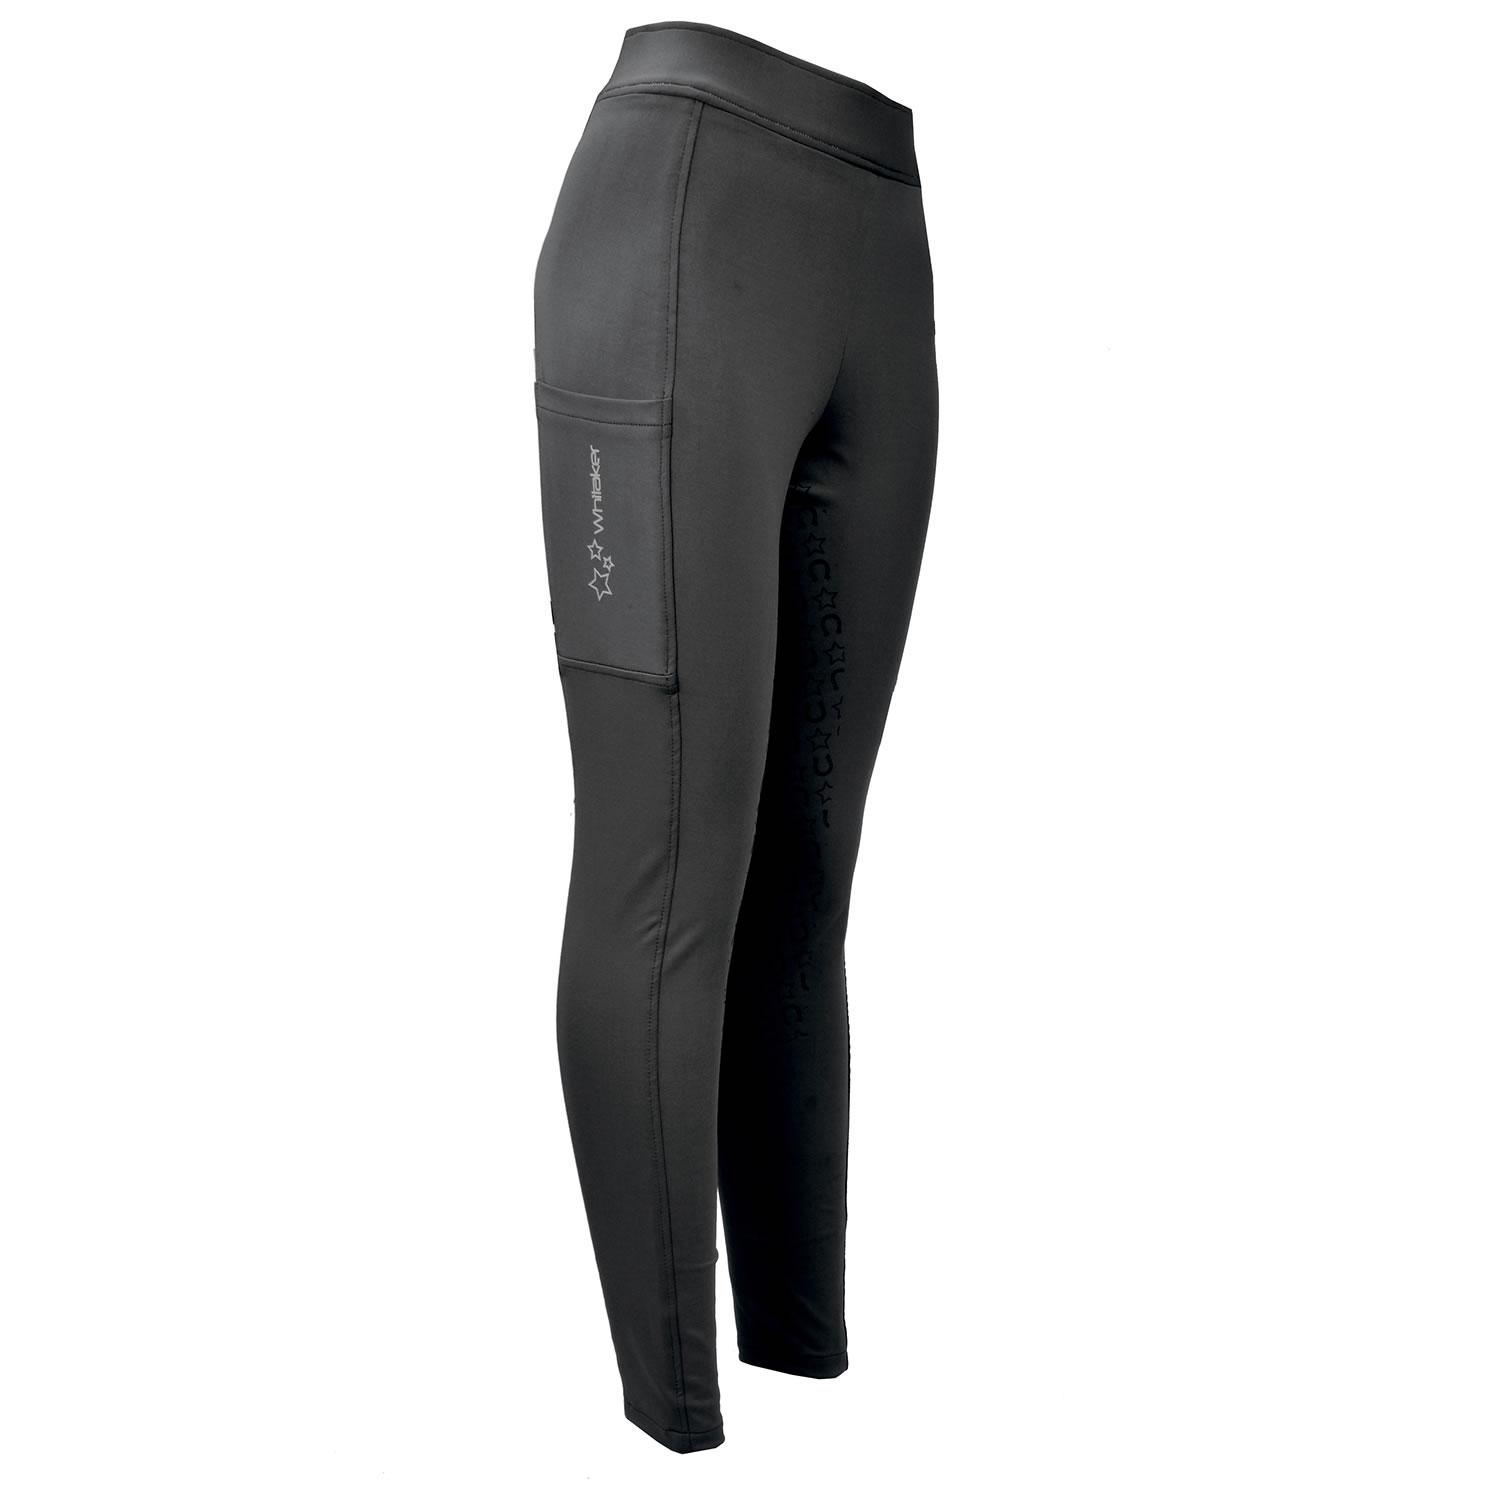 WHITAKER CLITHEROE RIDING TIGHTS CHILD BLACK  AGE 13 - 14 CHILD